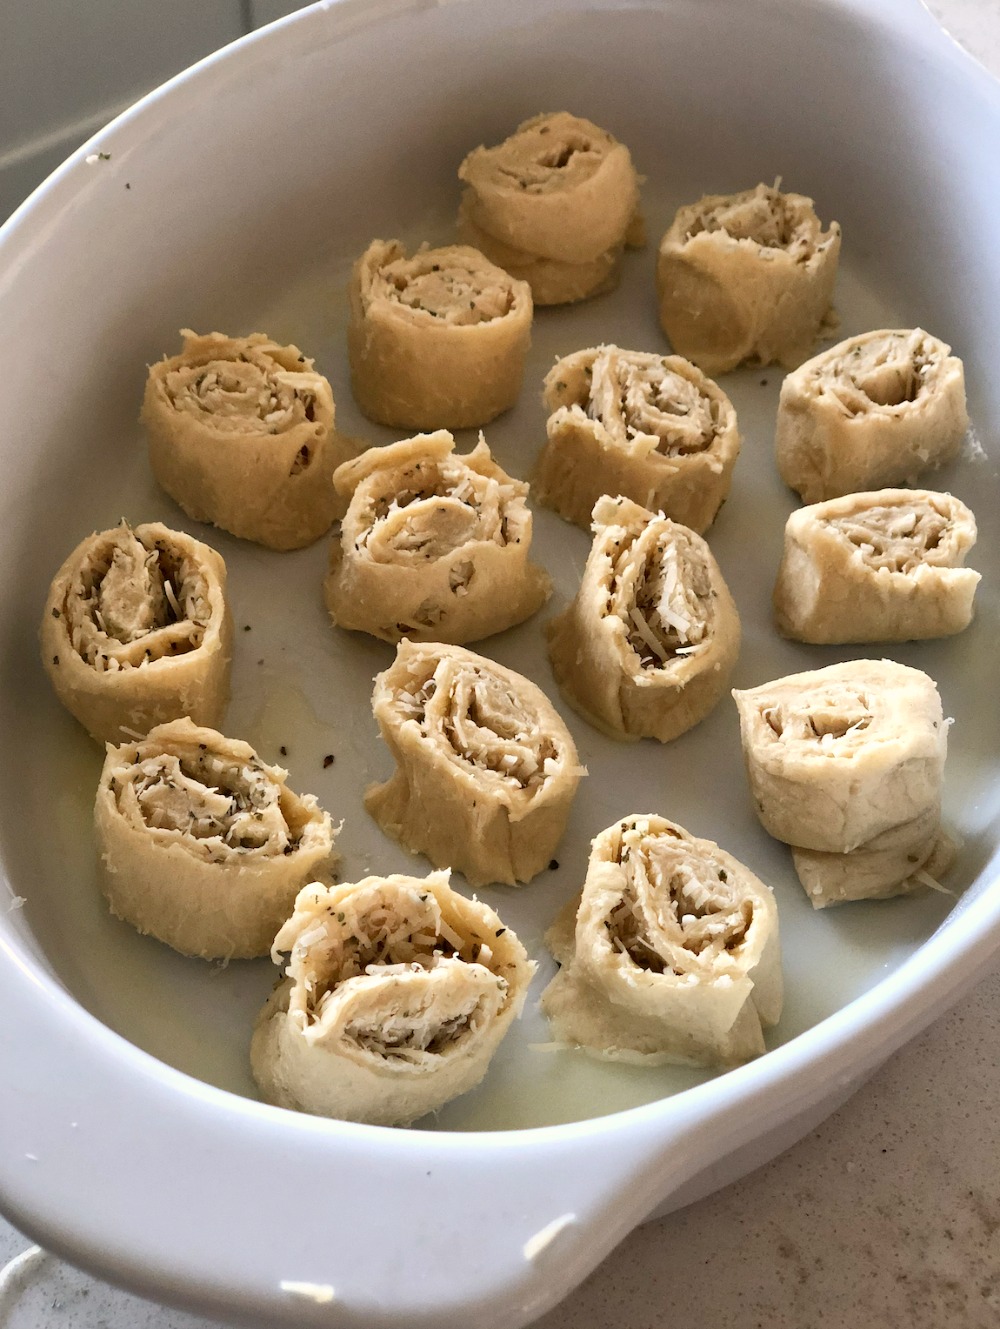 Crescent dough rolls placed in a baking dish